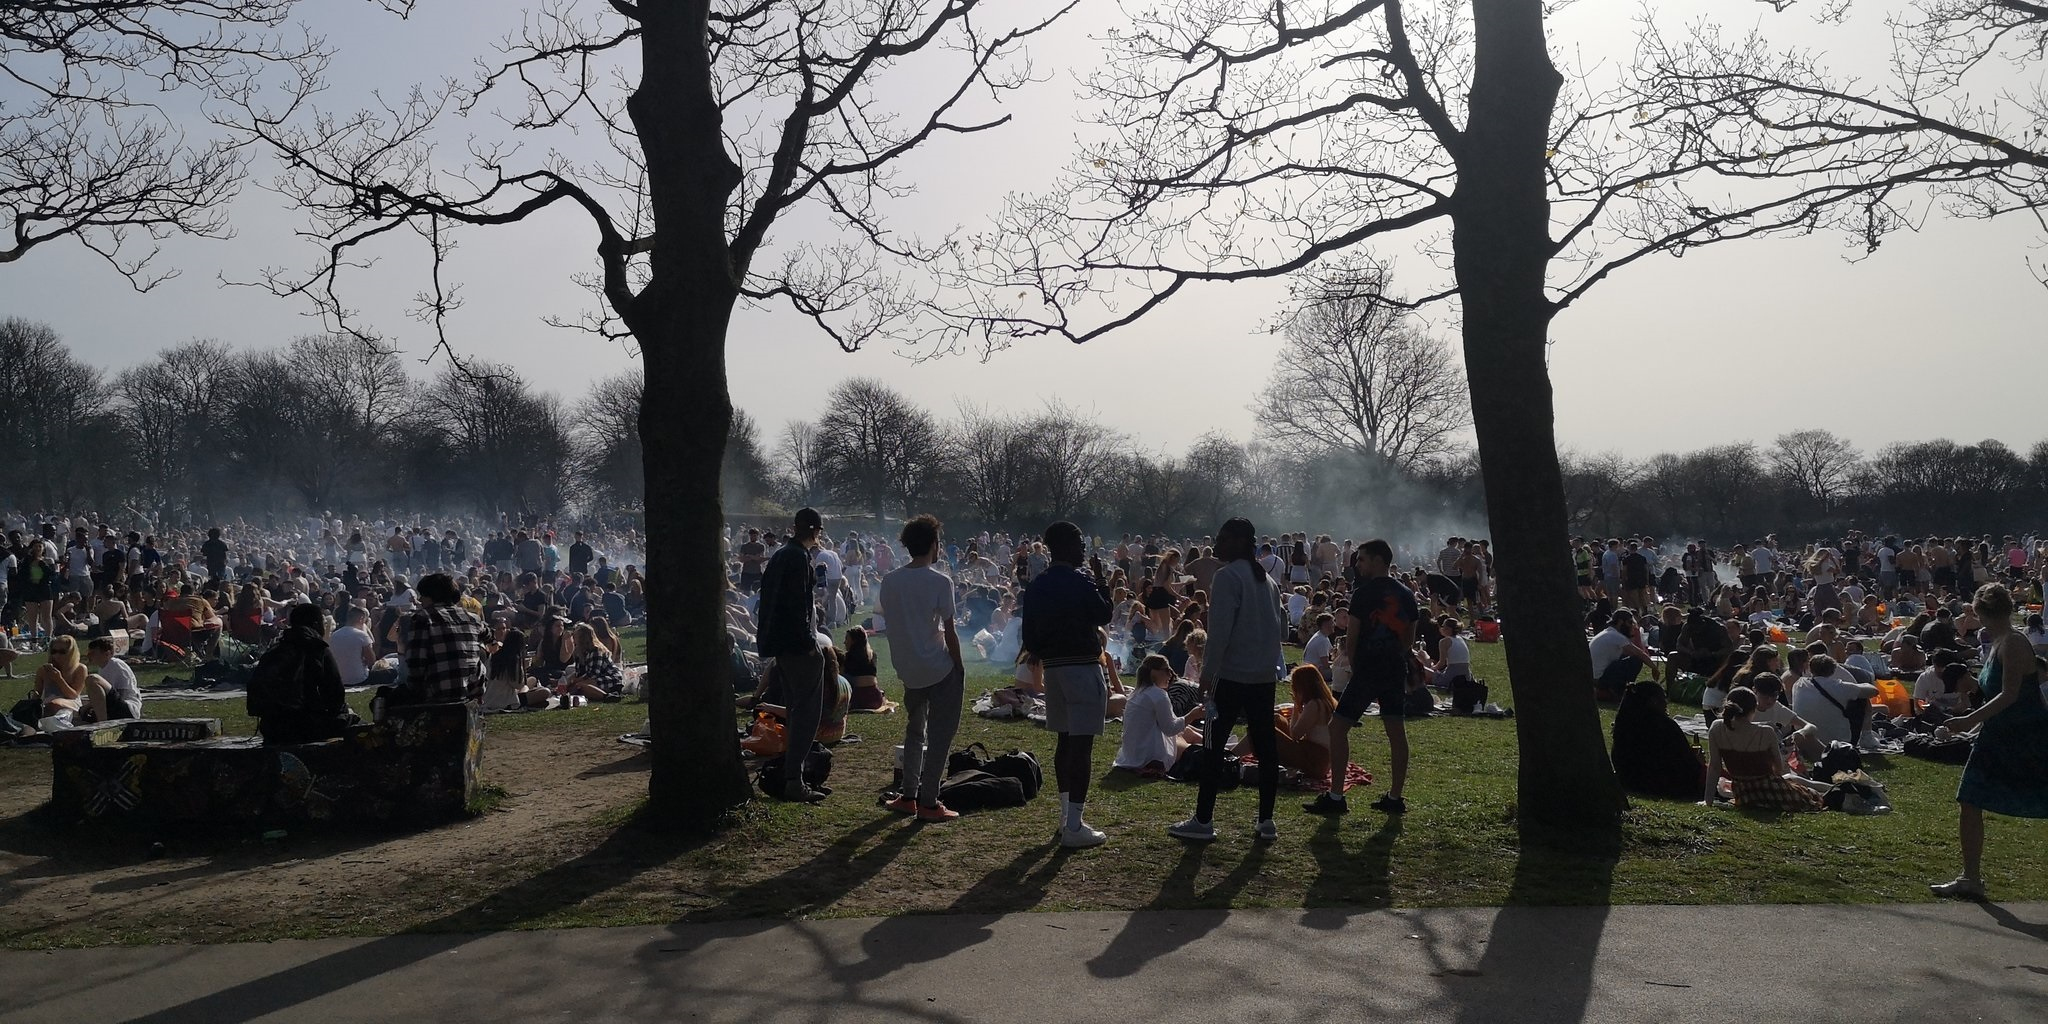 Crowds in Woodhouse Moor Park in Leeds, on Tuesday. Picture: PA